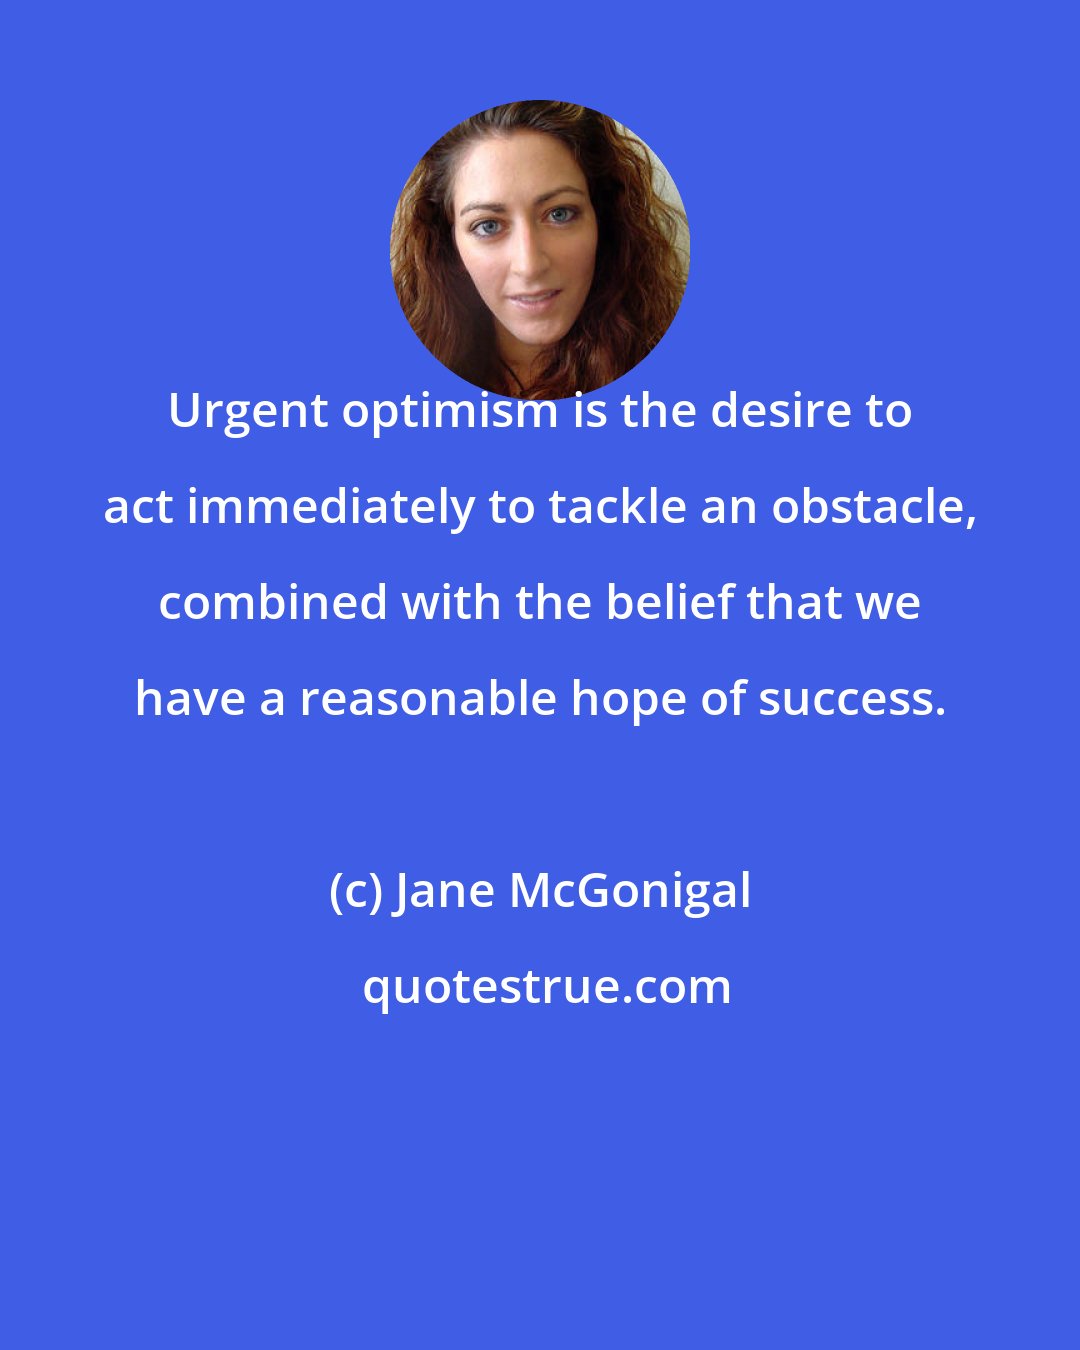 Jane McGonigal: Urgent optimism is the desire to act immediately to tackle an obstacle, combined with the belief that we have a reasonable hope of success.